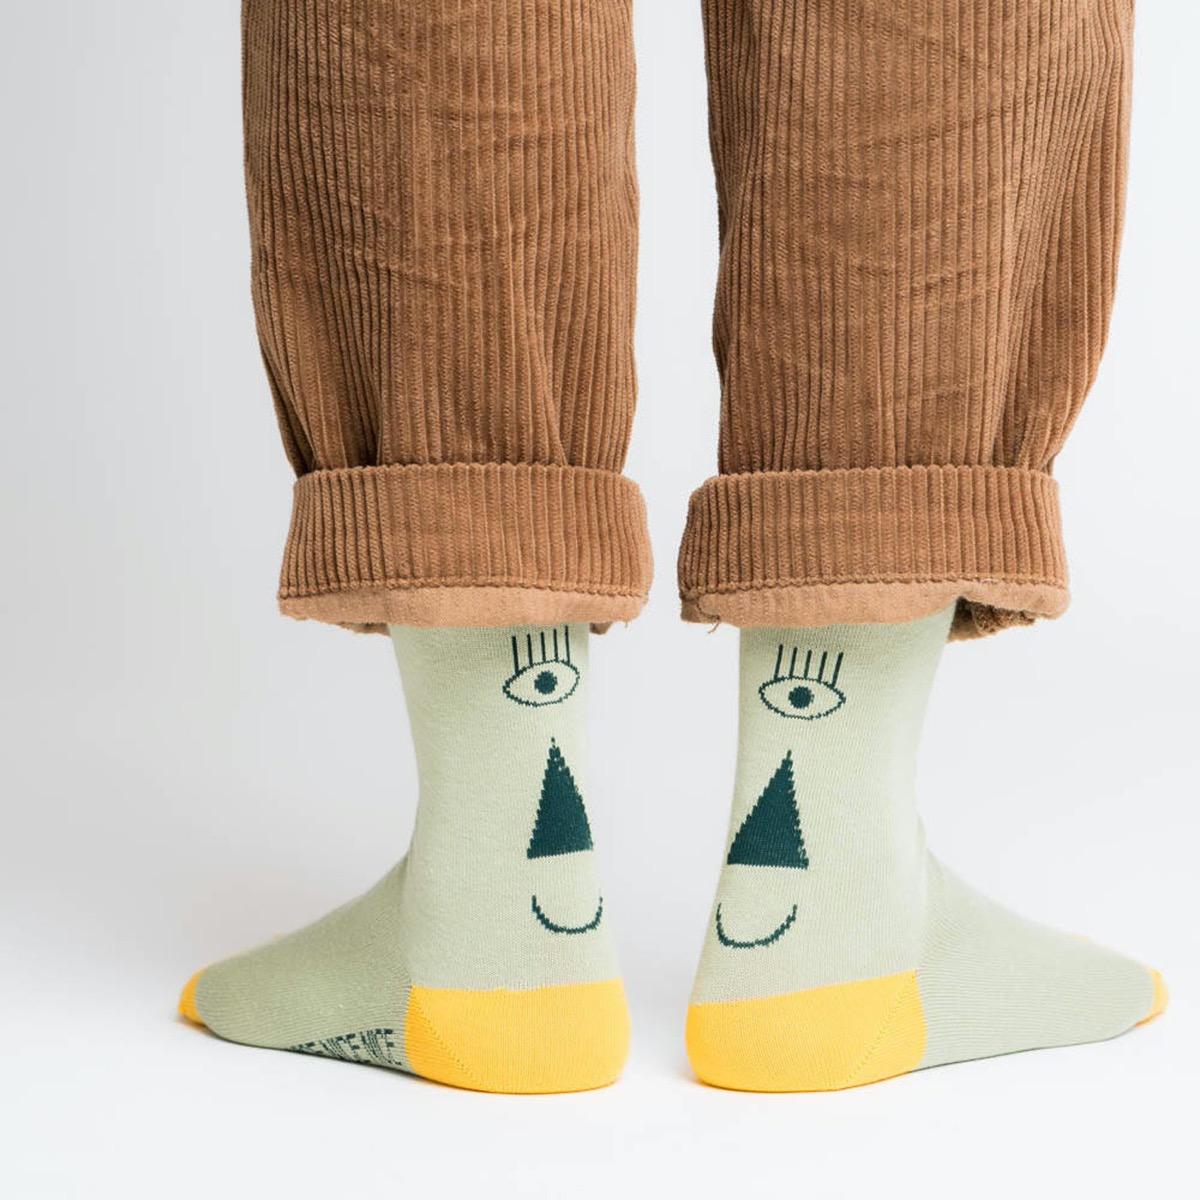 socks with smiling faces on them